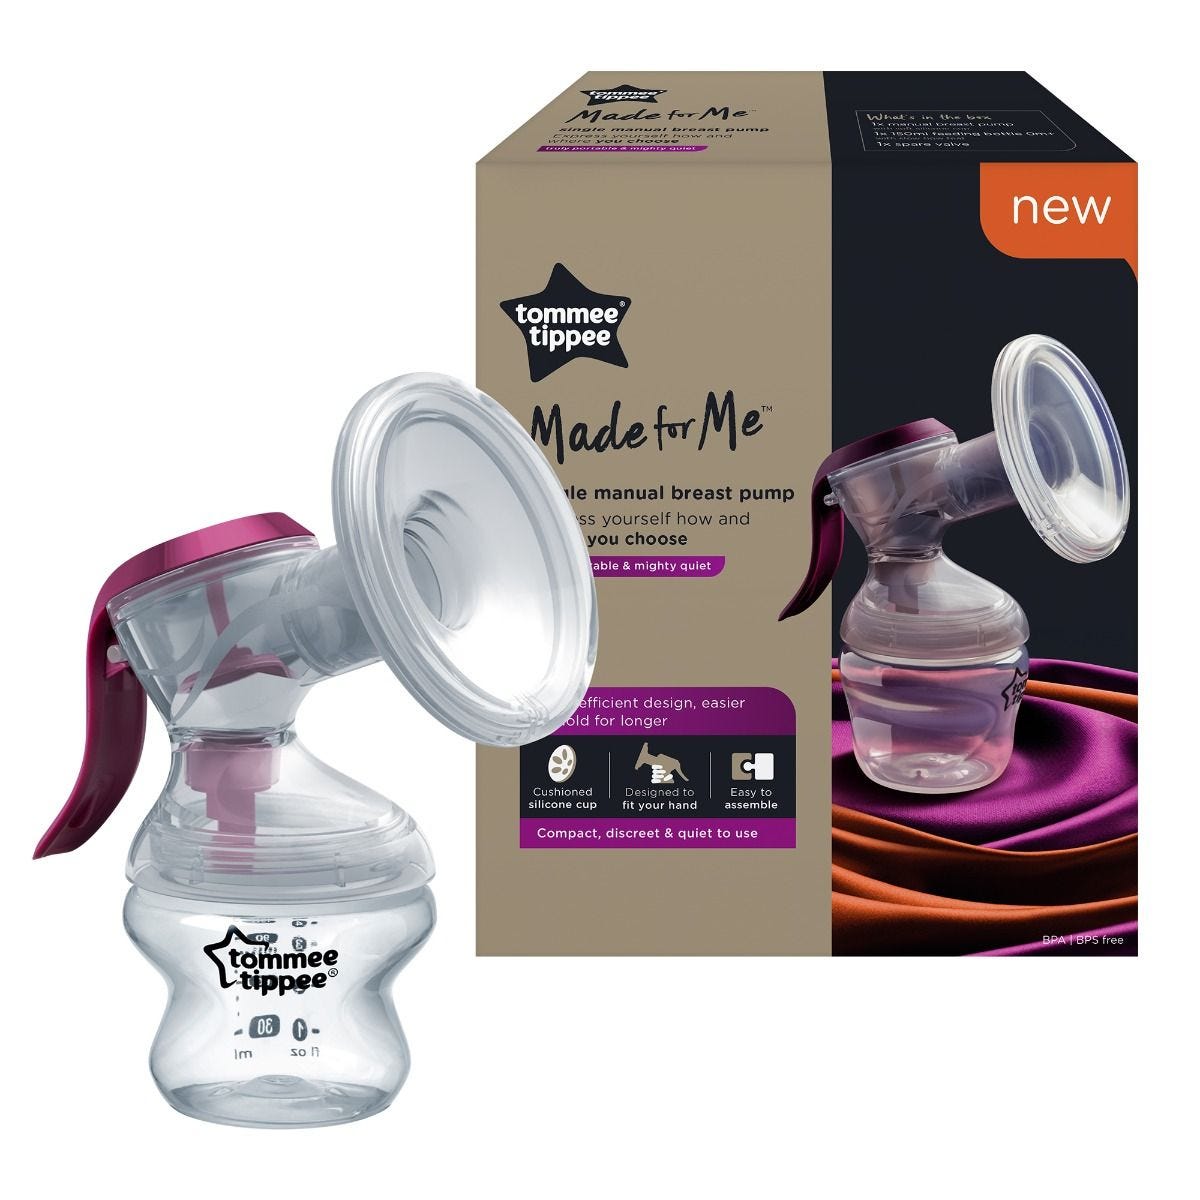 cushioned silicone cup NEW OTHER Tommee Tippee Manual Breast Pump with soft 